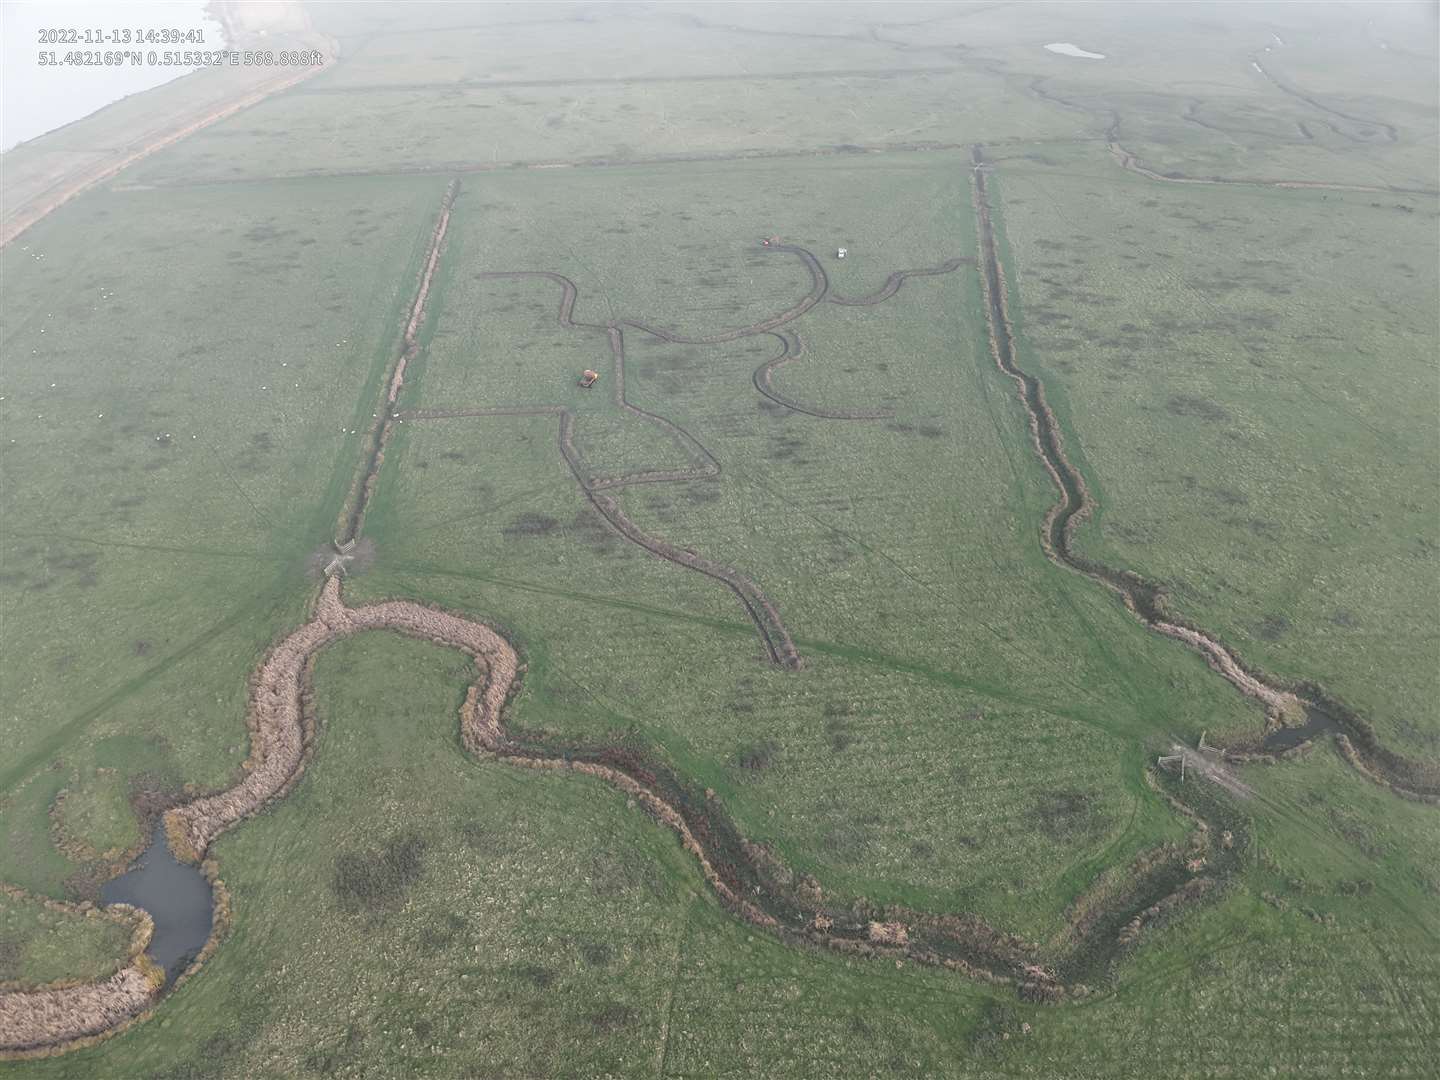 An aerial view of Alex's farm land which is being rewilded